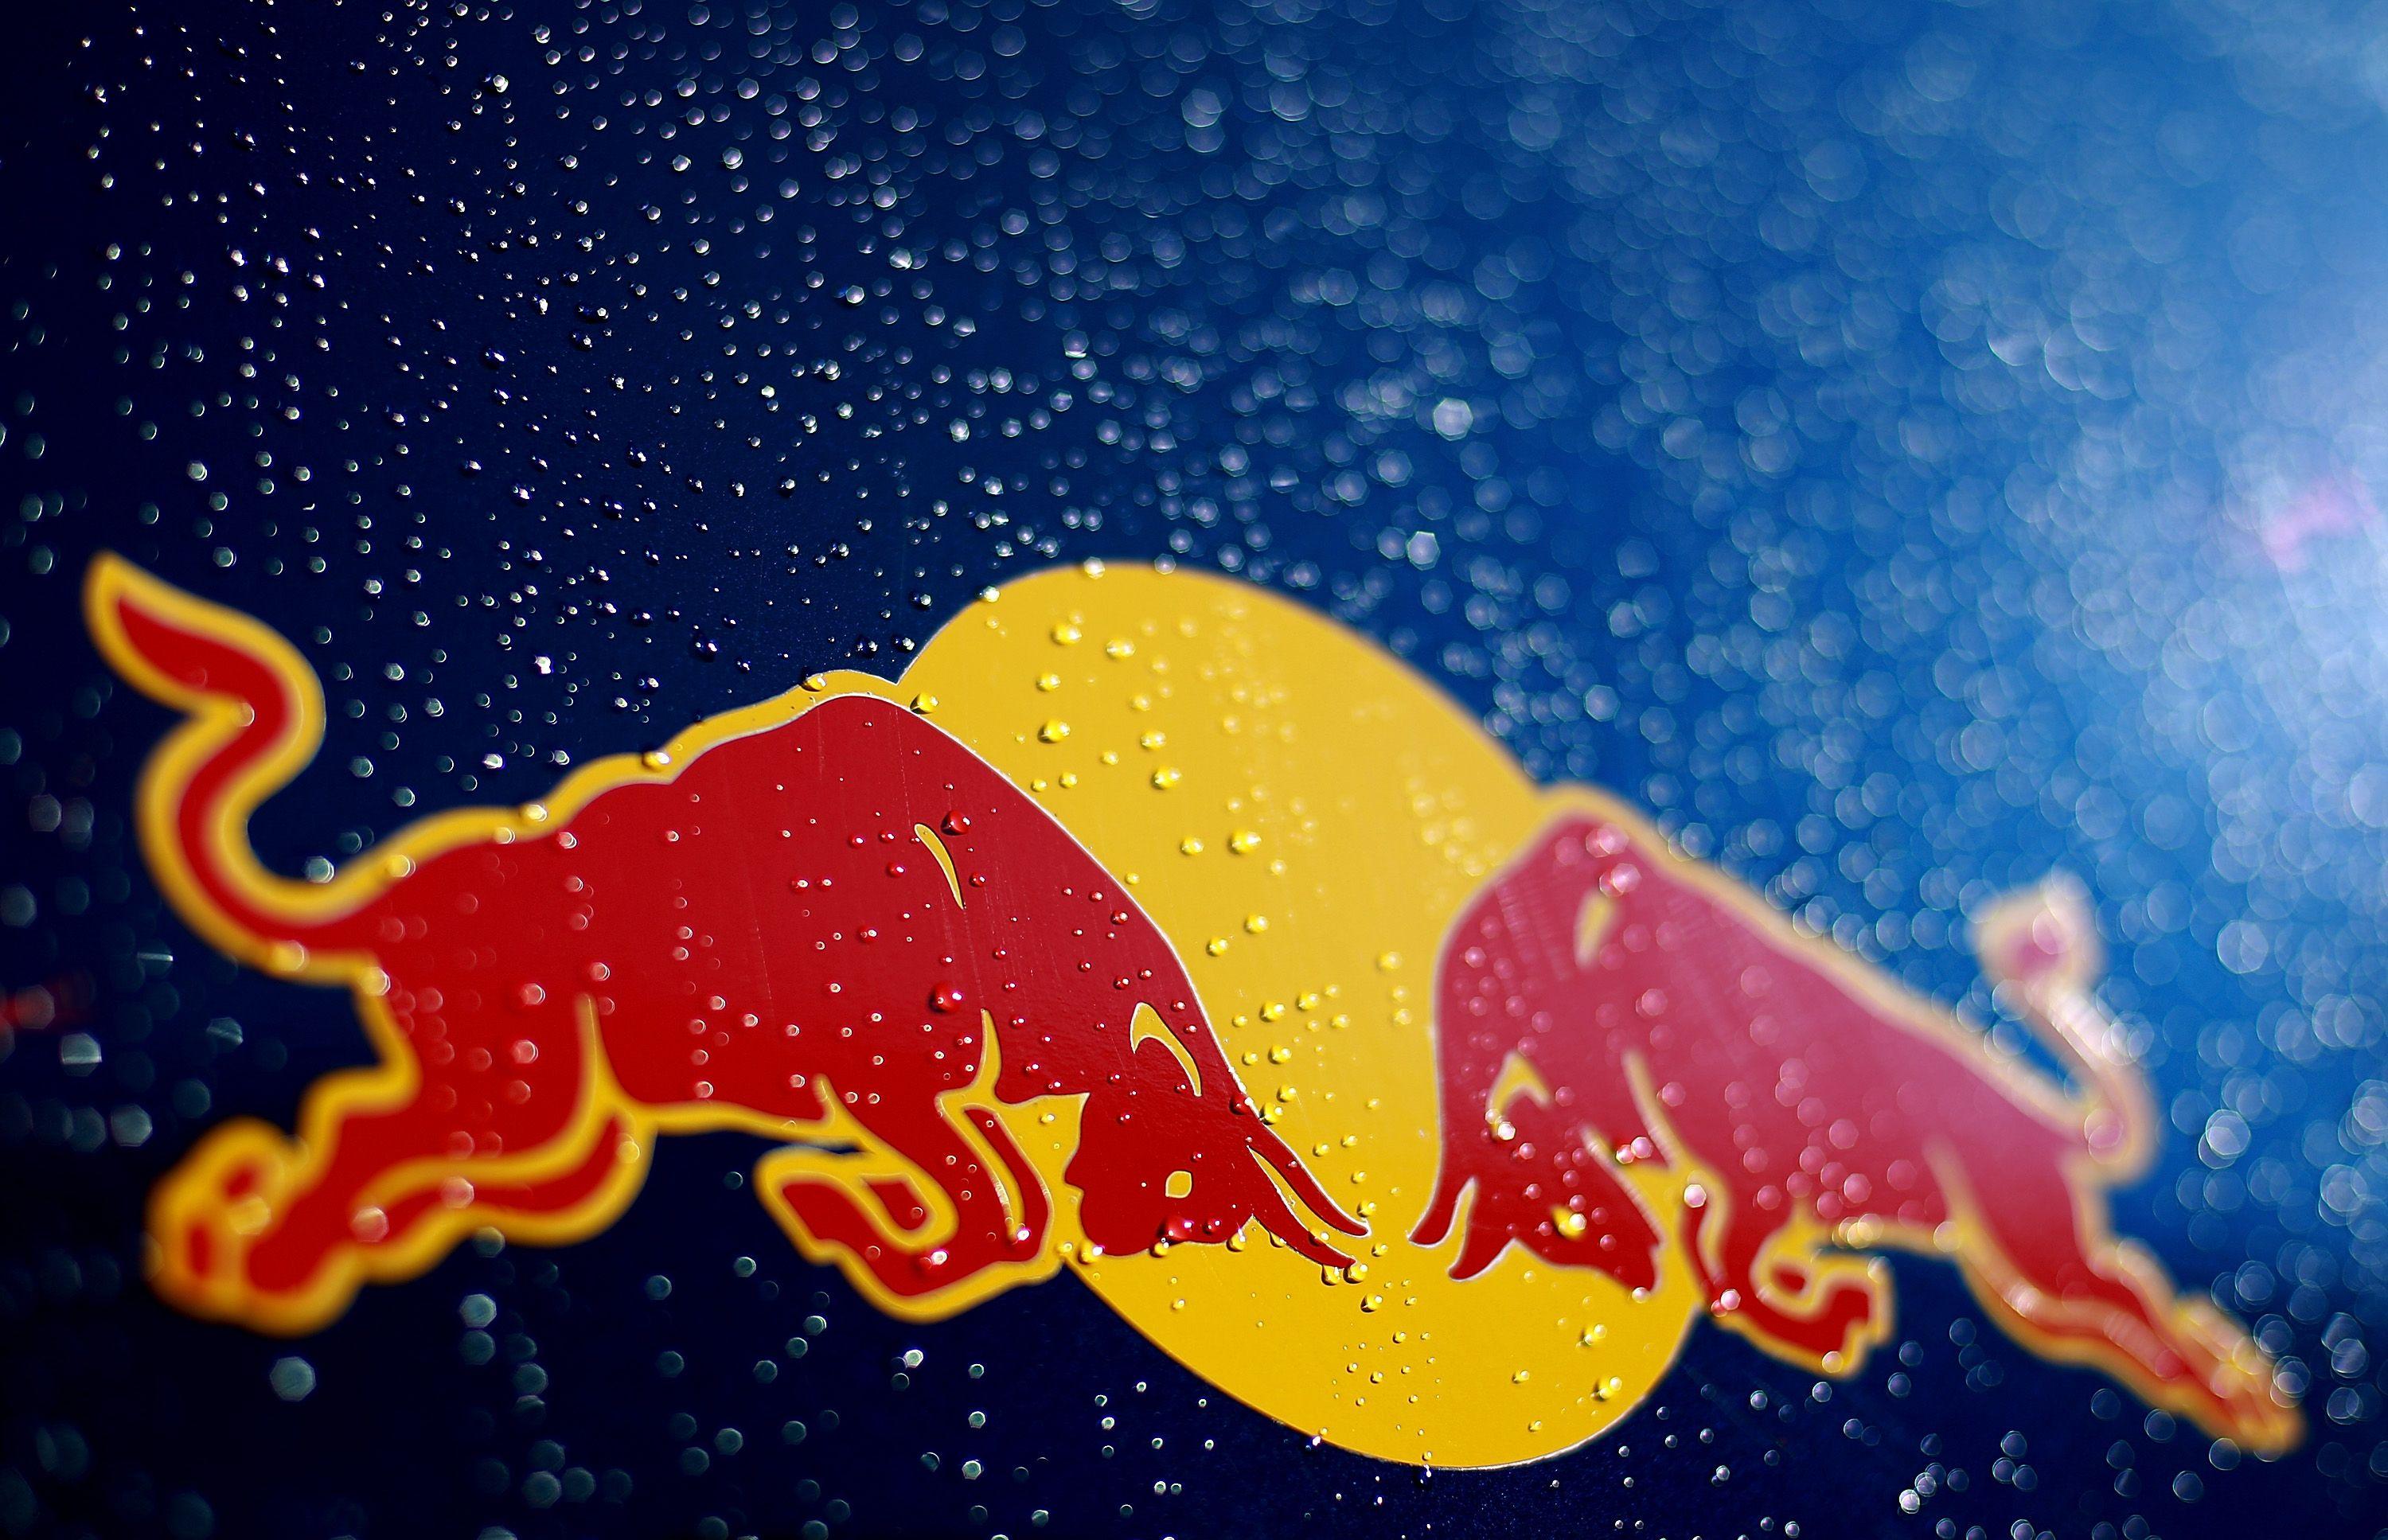 Cool Red and Blue Logo - MotoGP: Red Bull Logo to appear on Honda Machines in 2015 and 2016